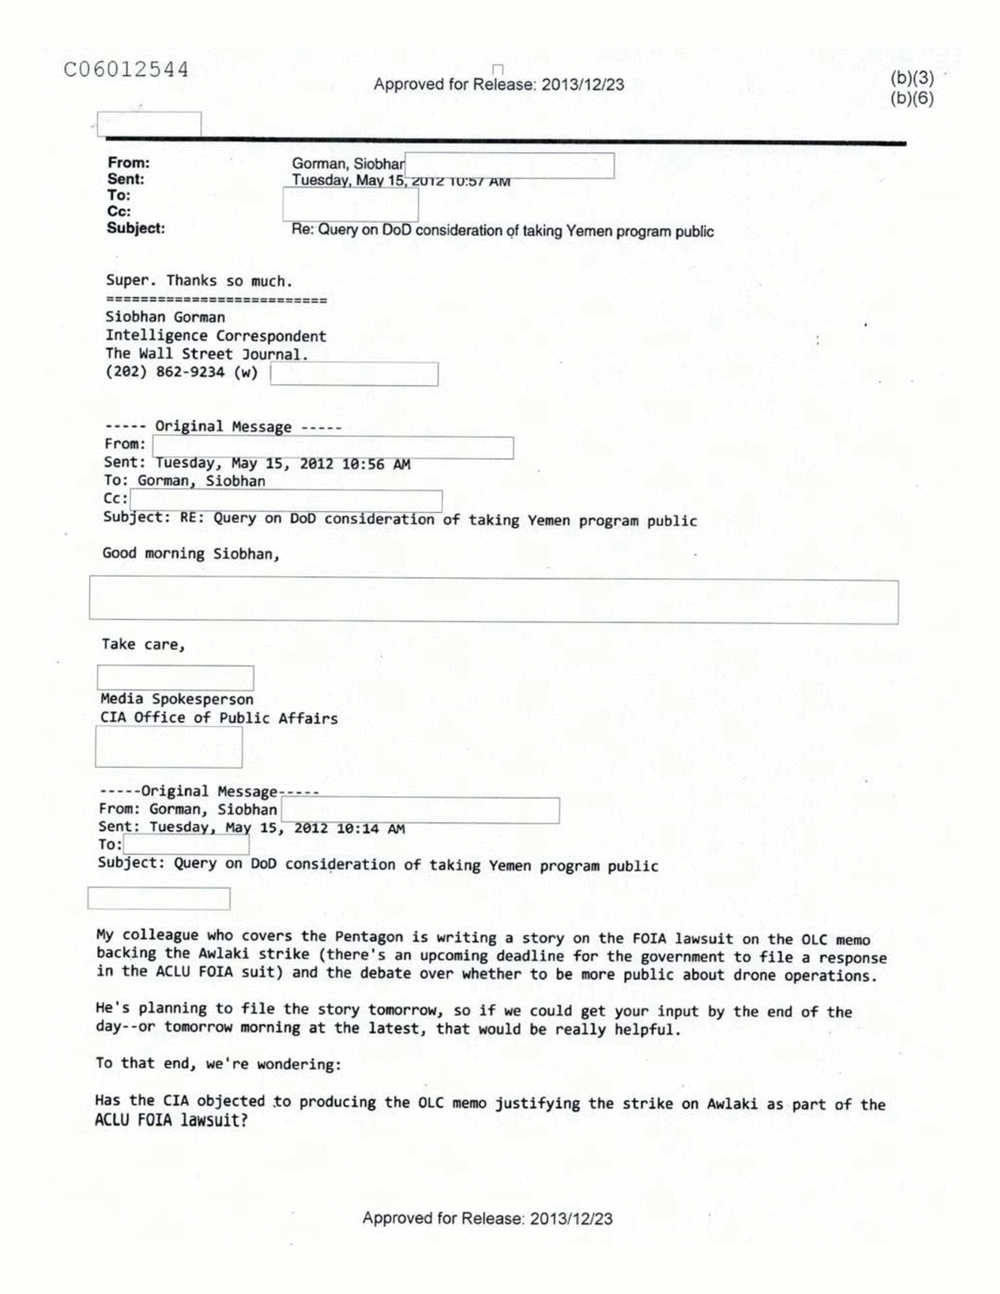 Page 77 from Email Correspondence Between Reporters and CIA Flacks